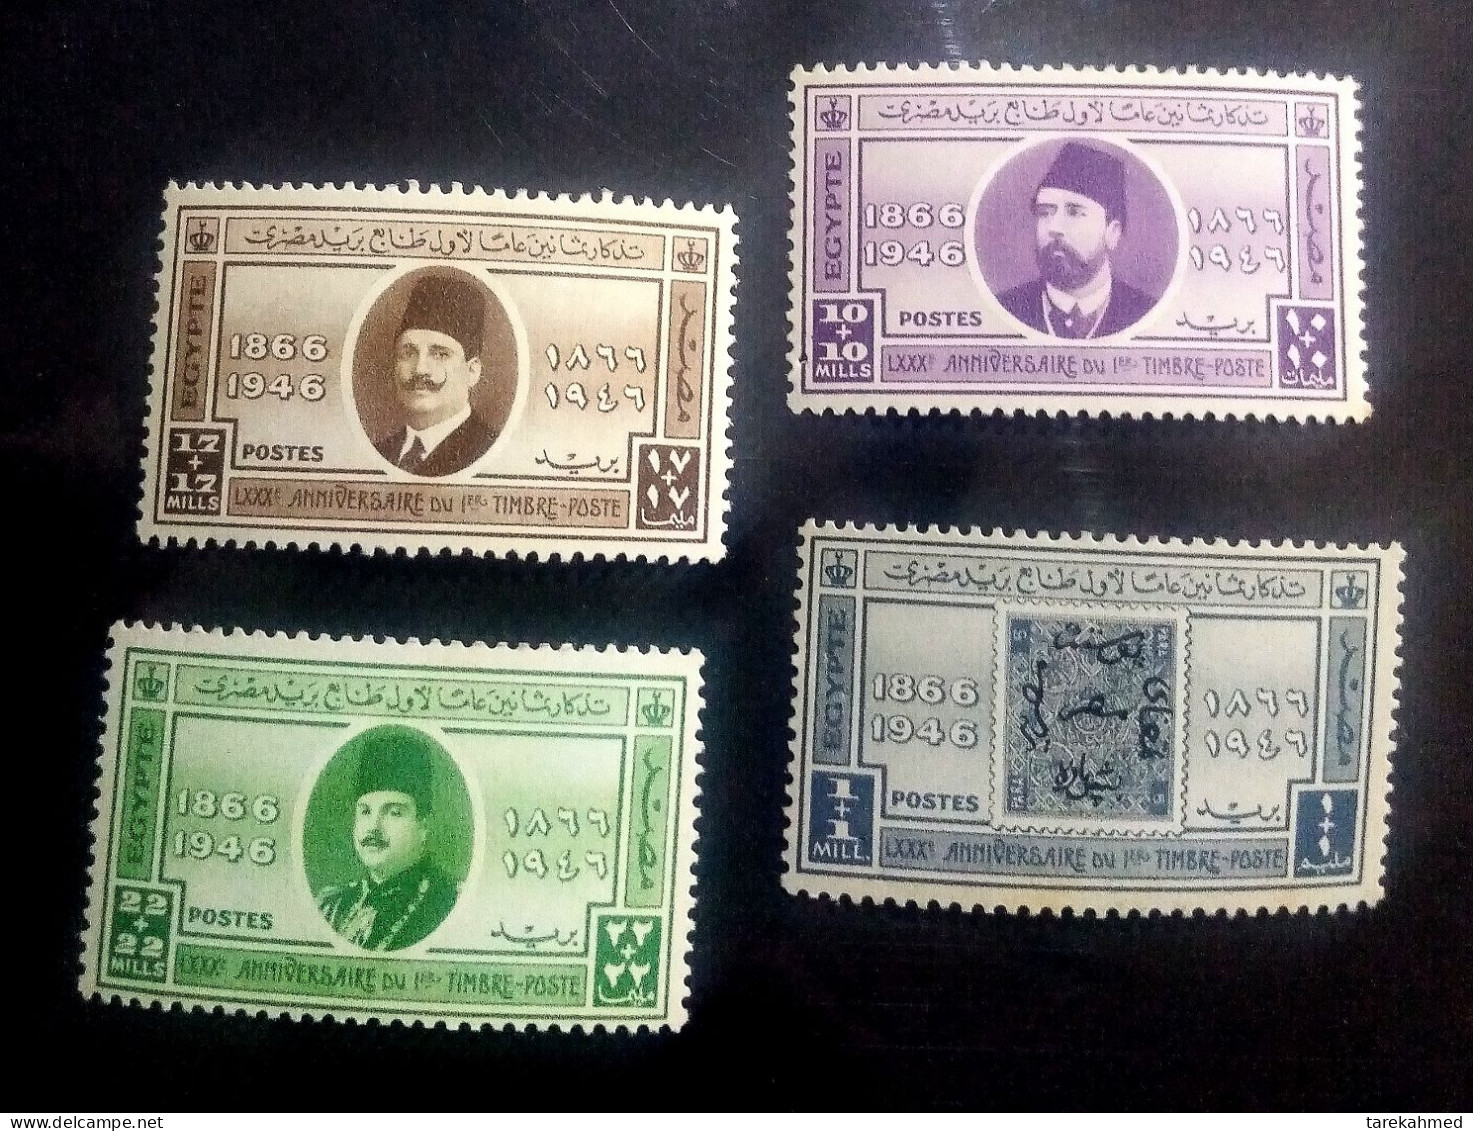 Egypt 1946 - Complete Set Of The 80th Anniv. Of Egypt’s 1st Postage Stamp - MNH, Original Gum. - Unused Stamps